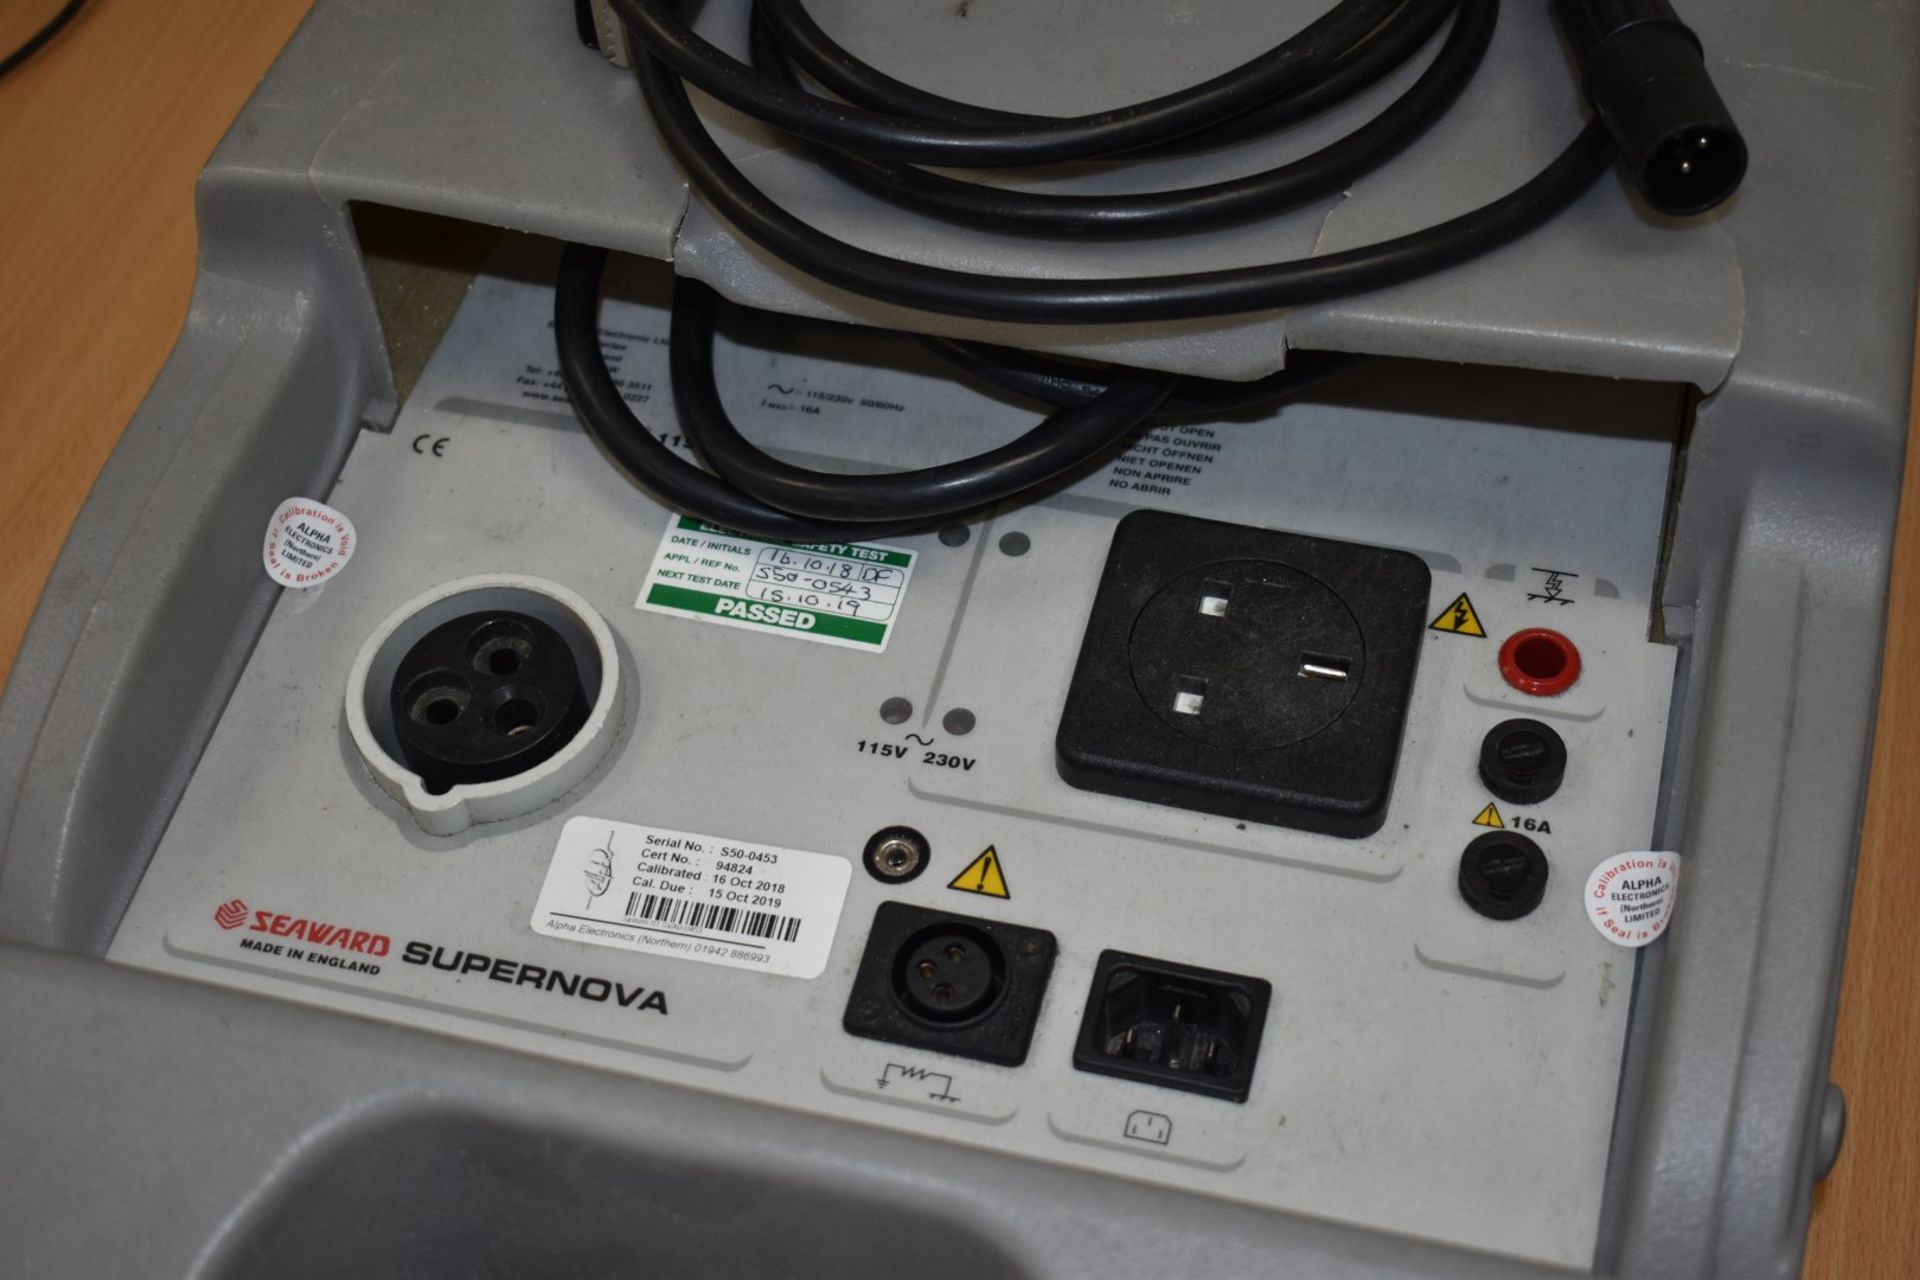 1 x Seaward Supernova PAT Tester With Cables SRB163 - Image 5 of 7